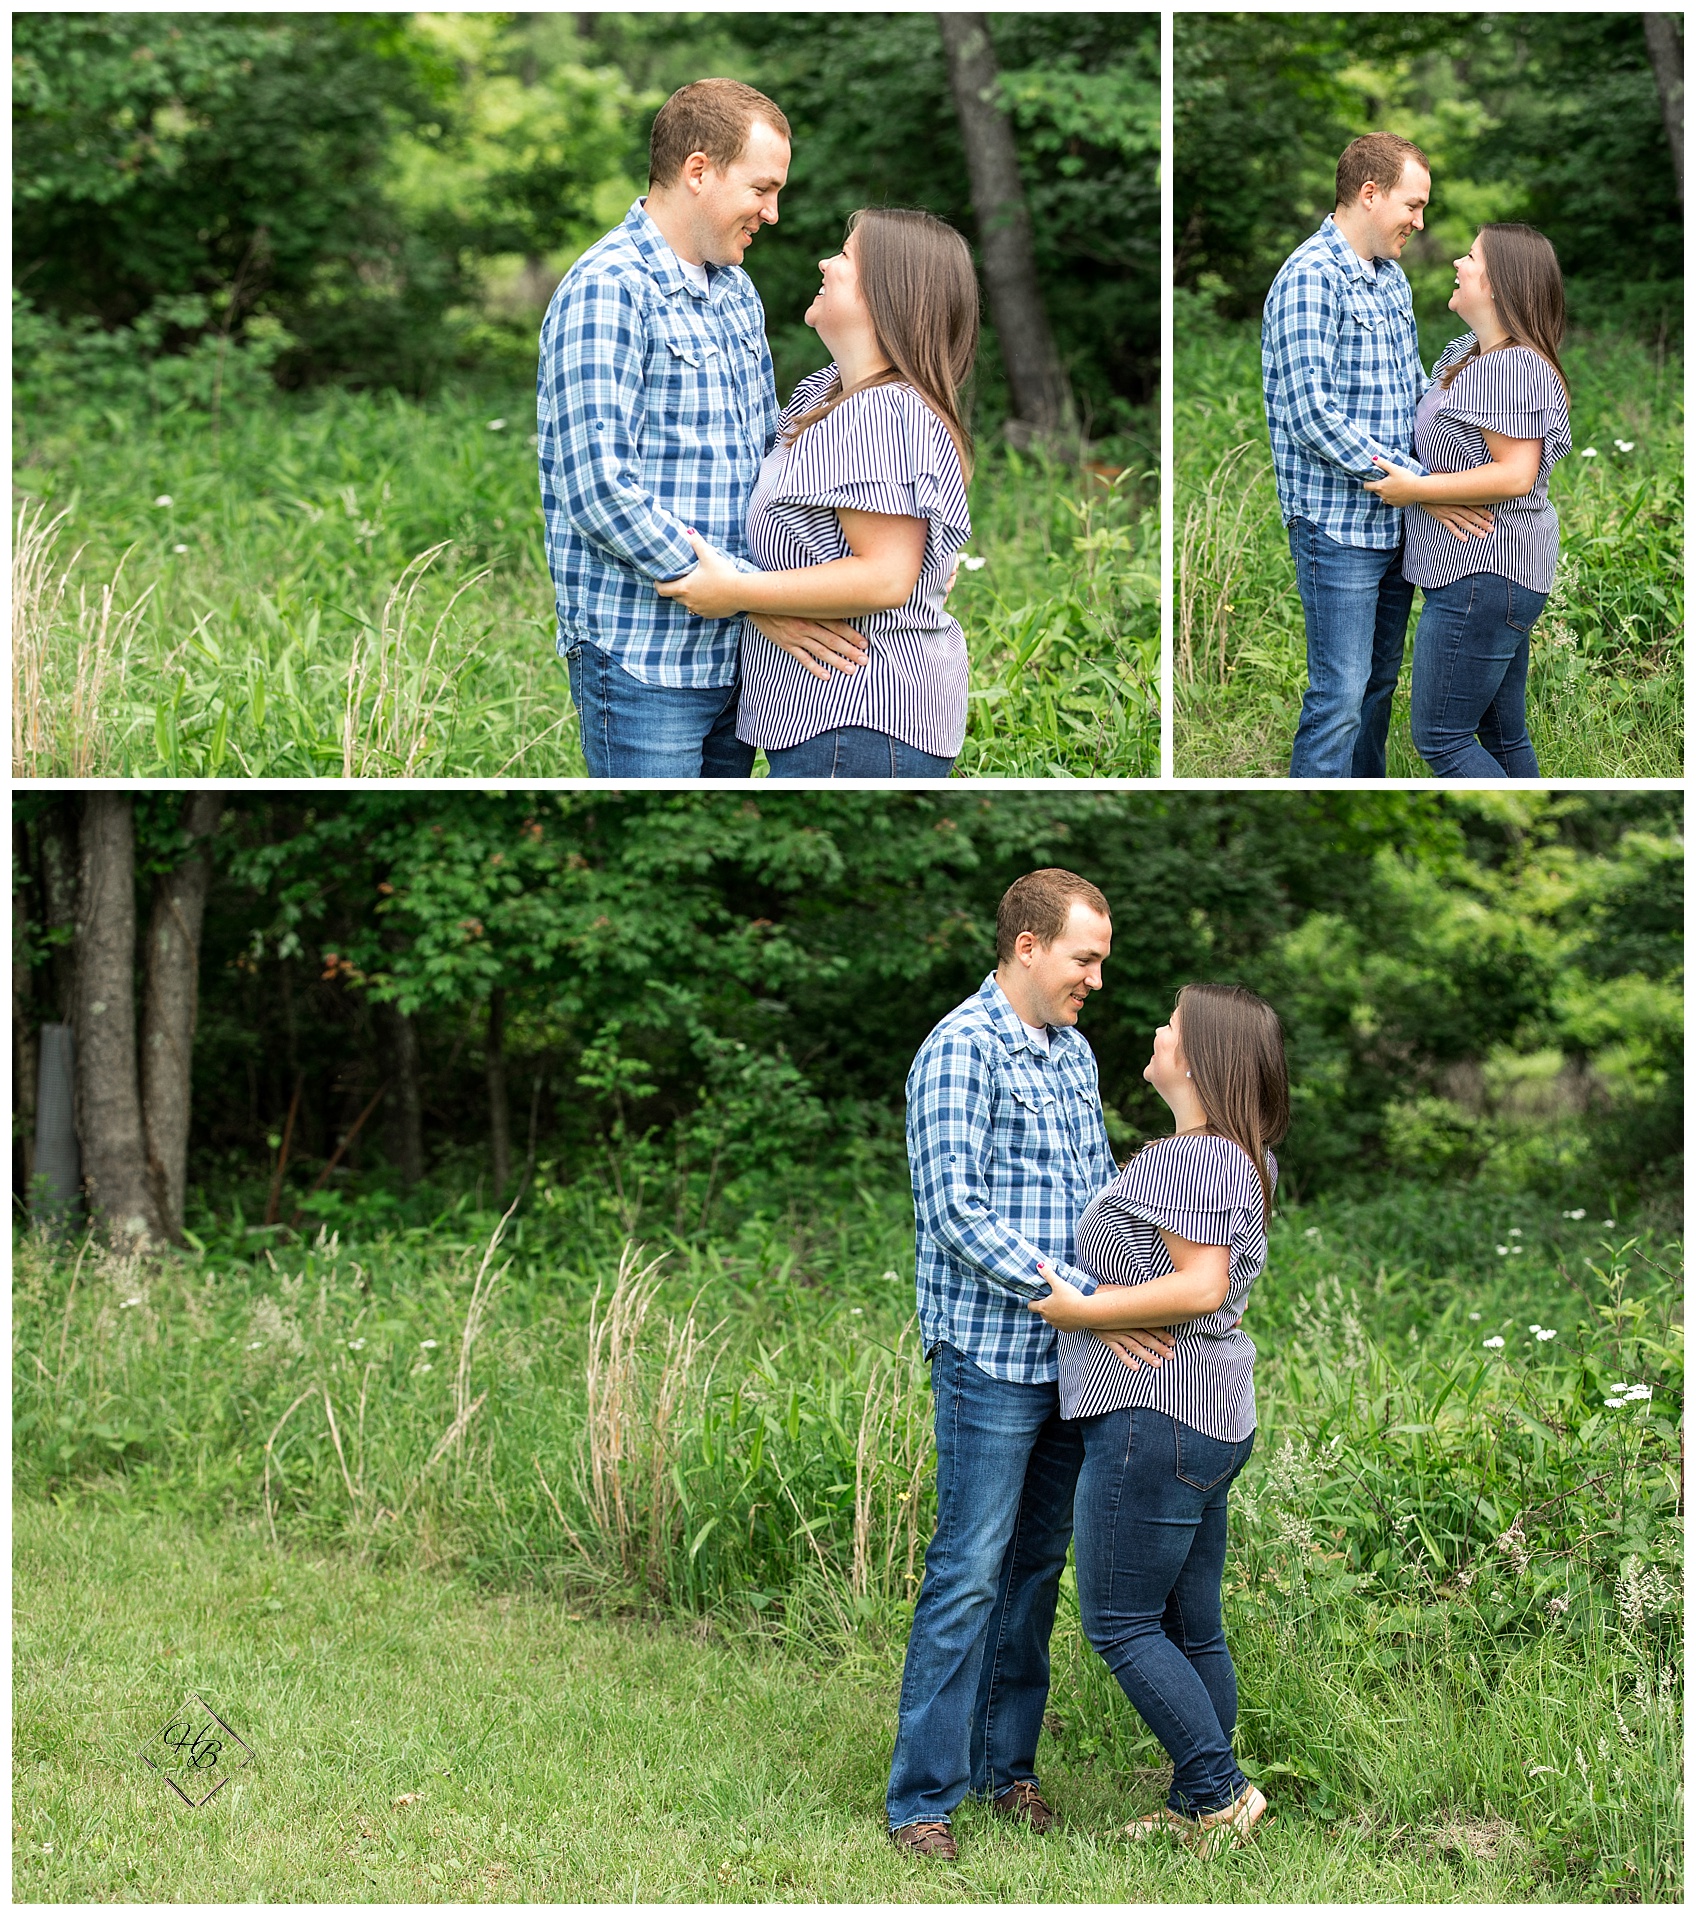 Summer Engagement Photos in a Field